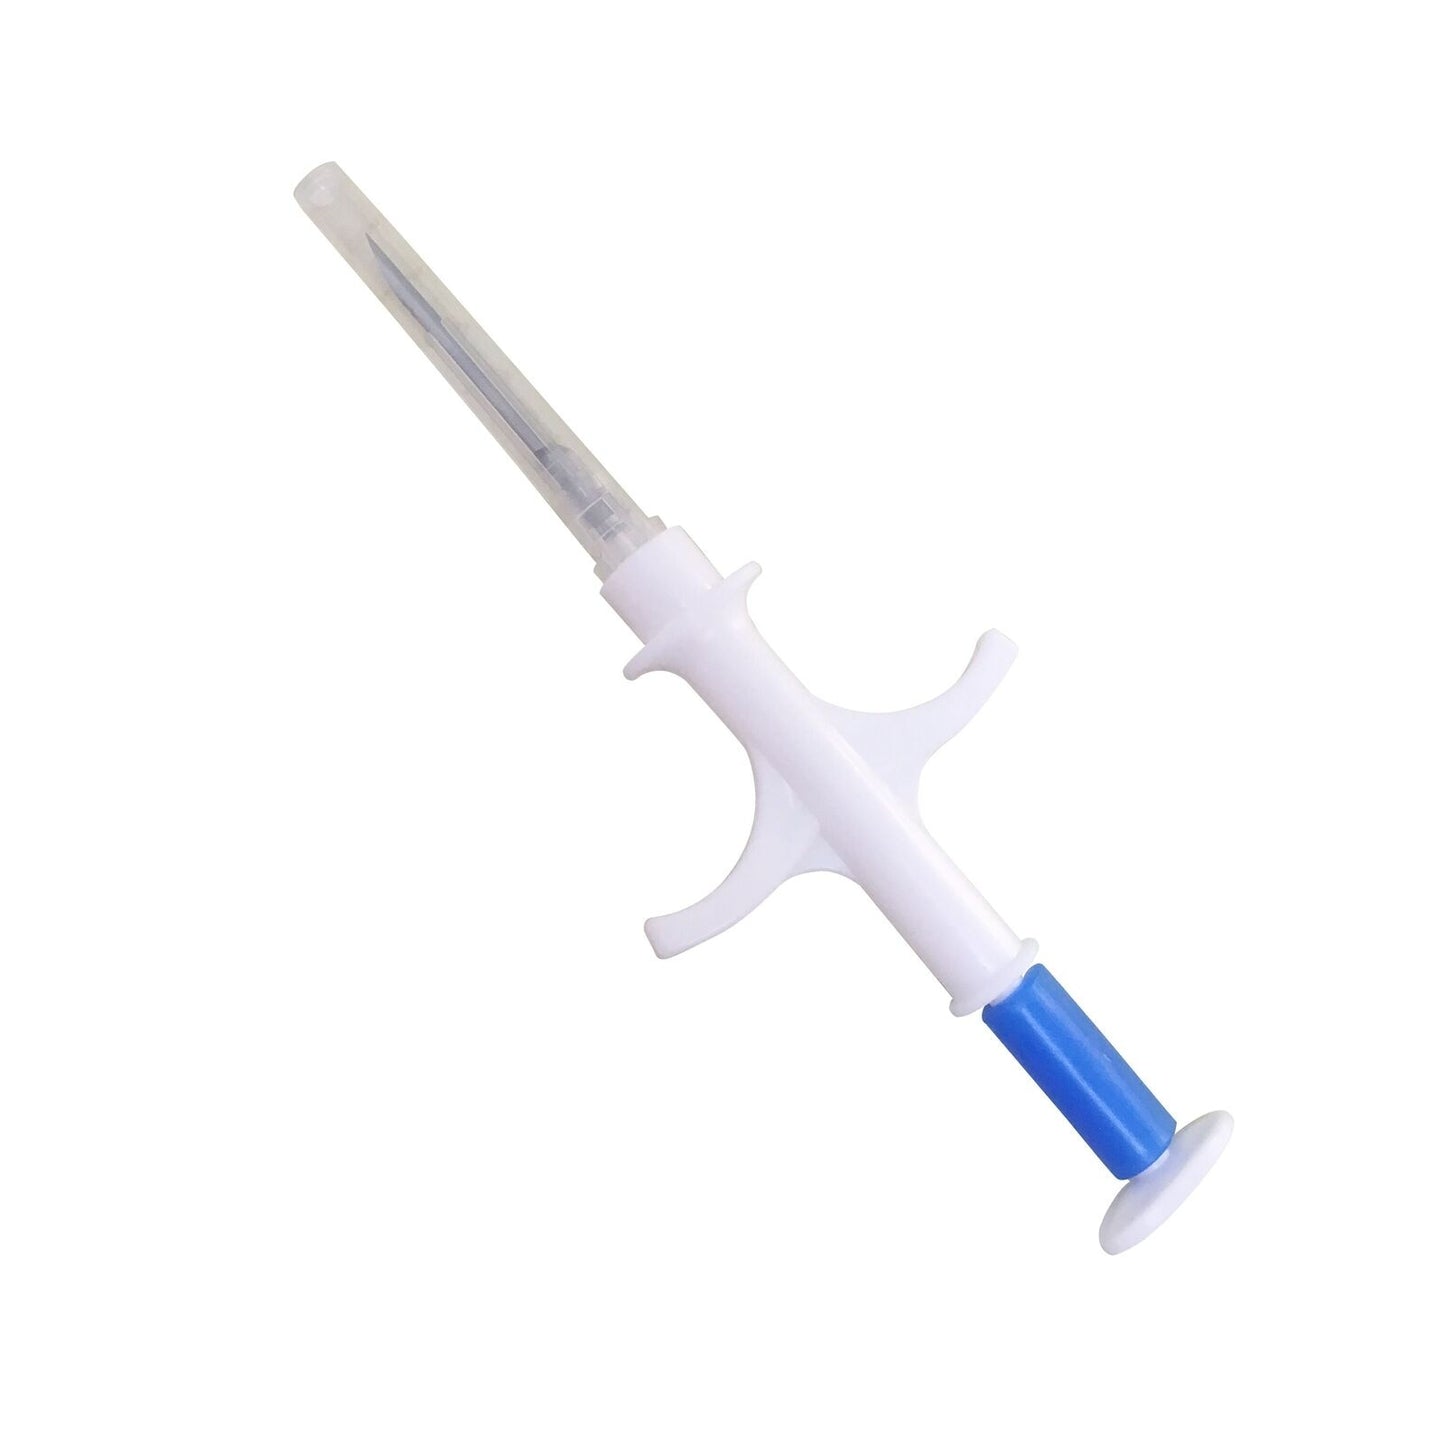 Animal Id Tags Veterinary Transponder Syringe Dog Chip 1.4*8mm Pet Microchip with Needle Unit X5